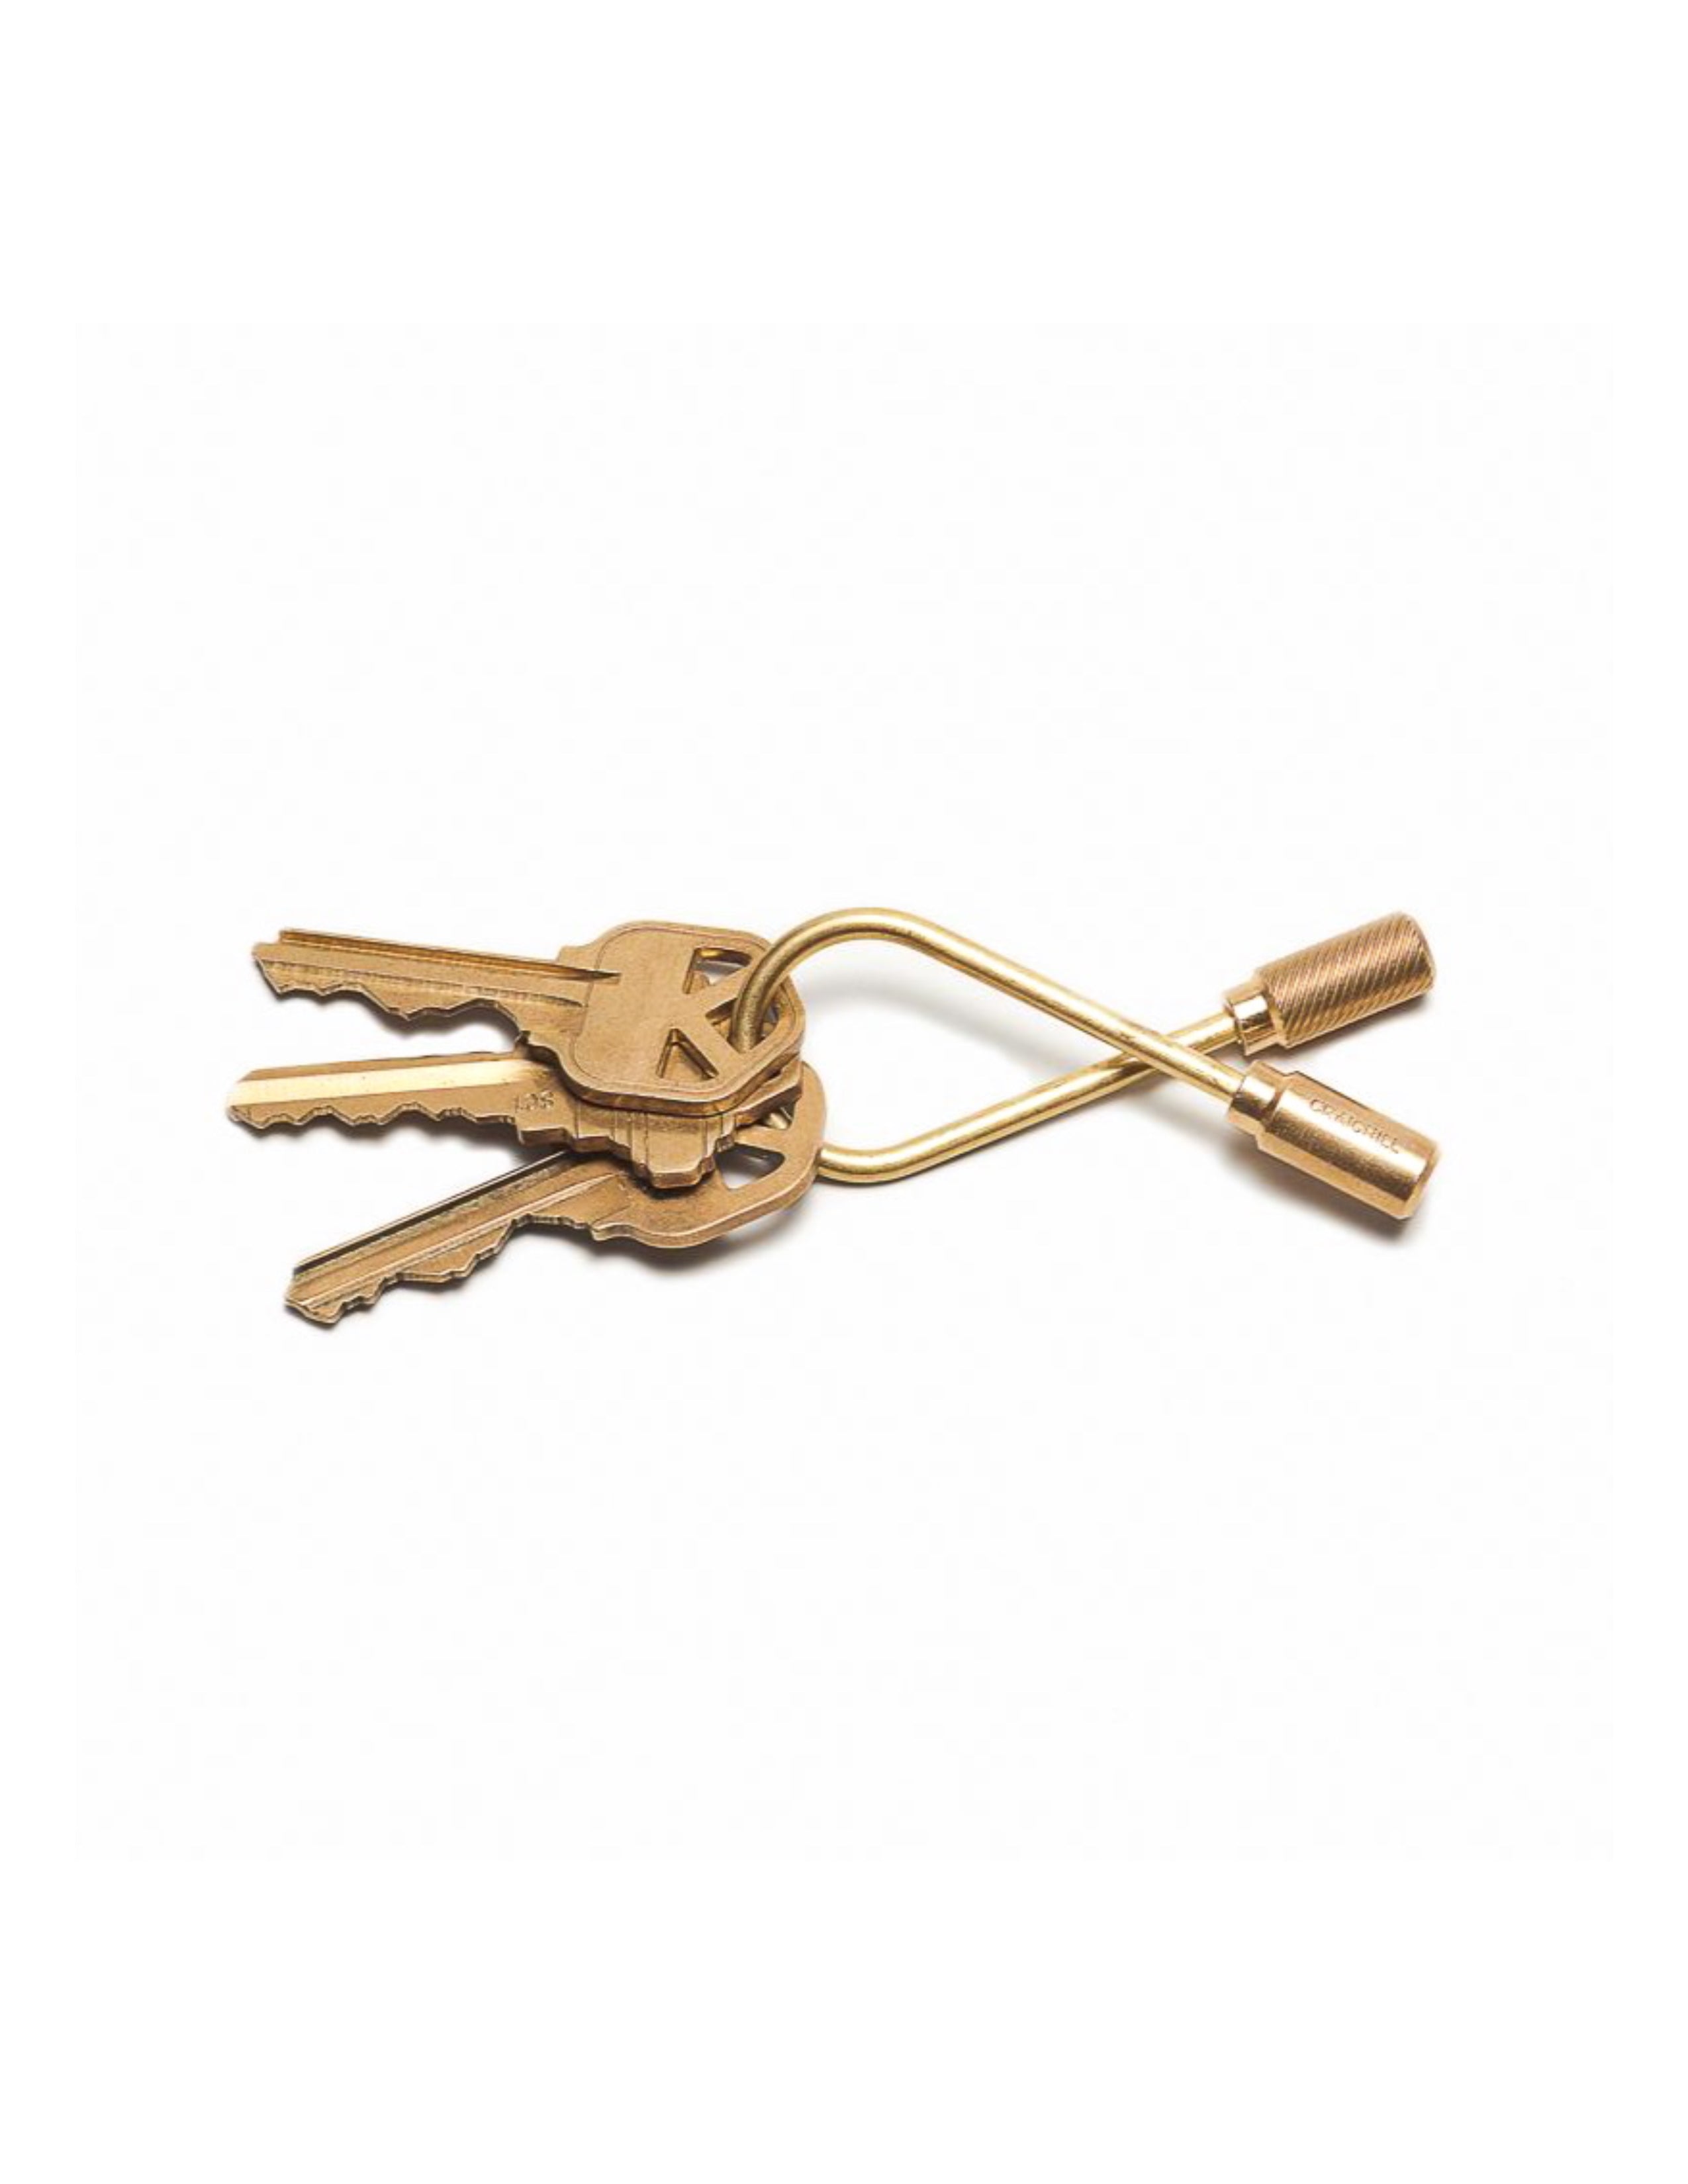 Closed Helix Key Ring - Brass